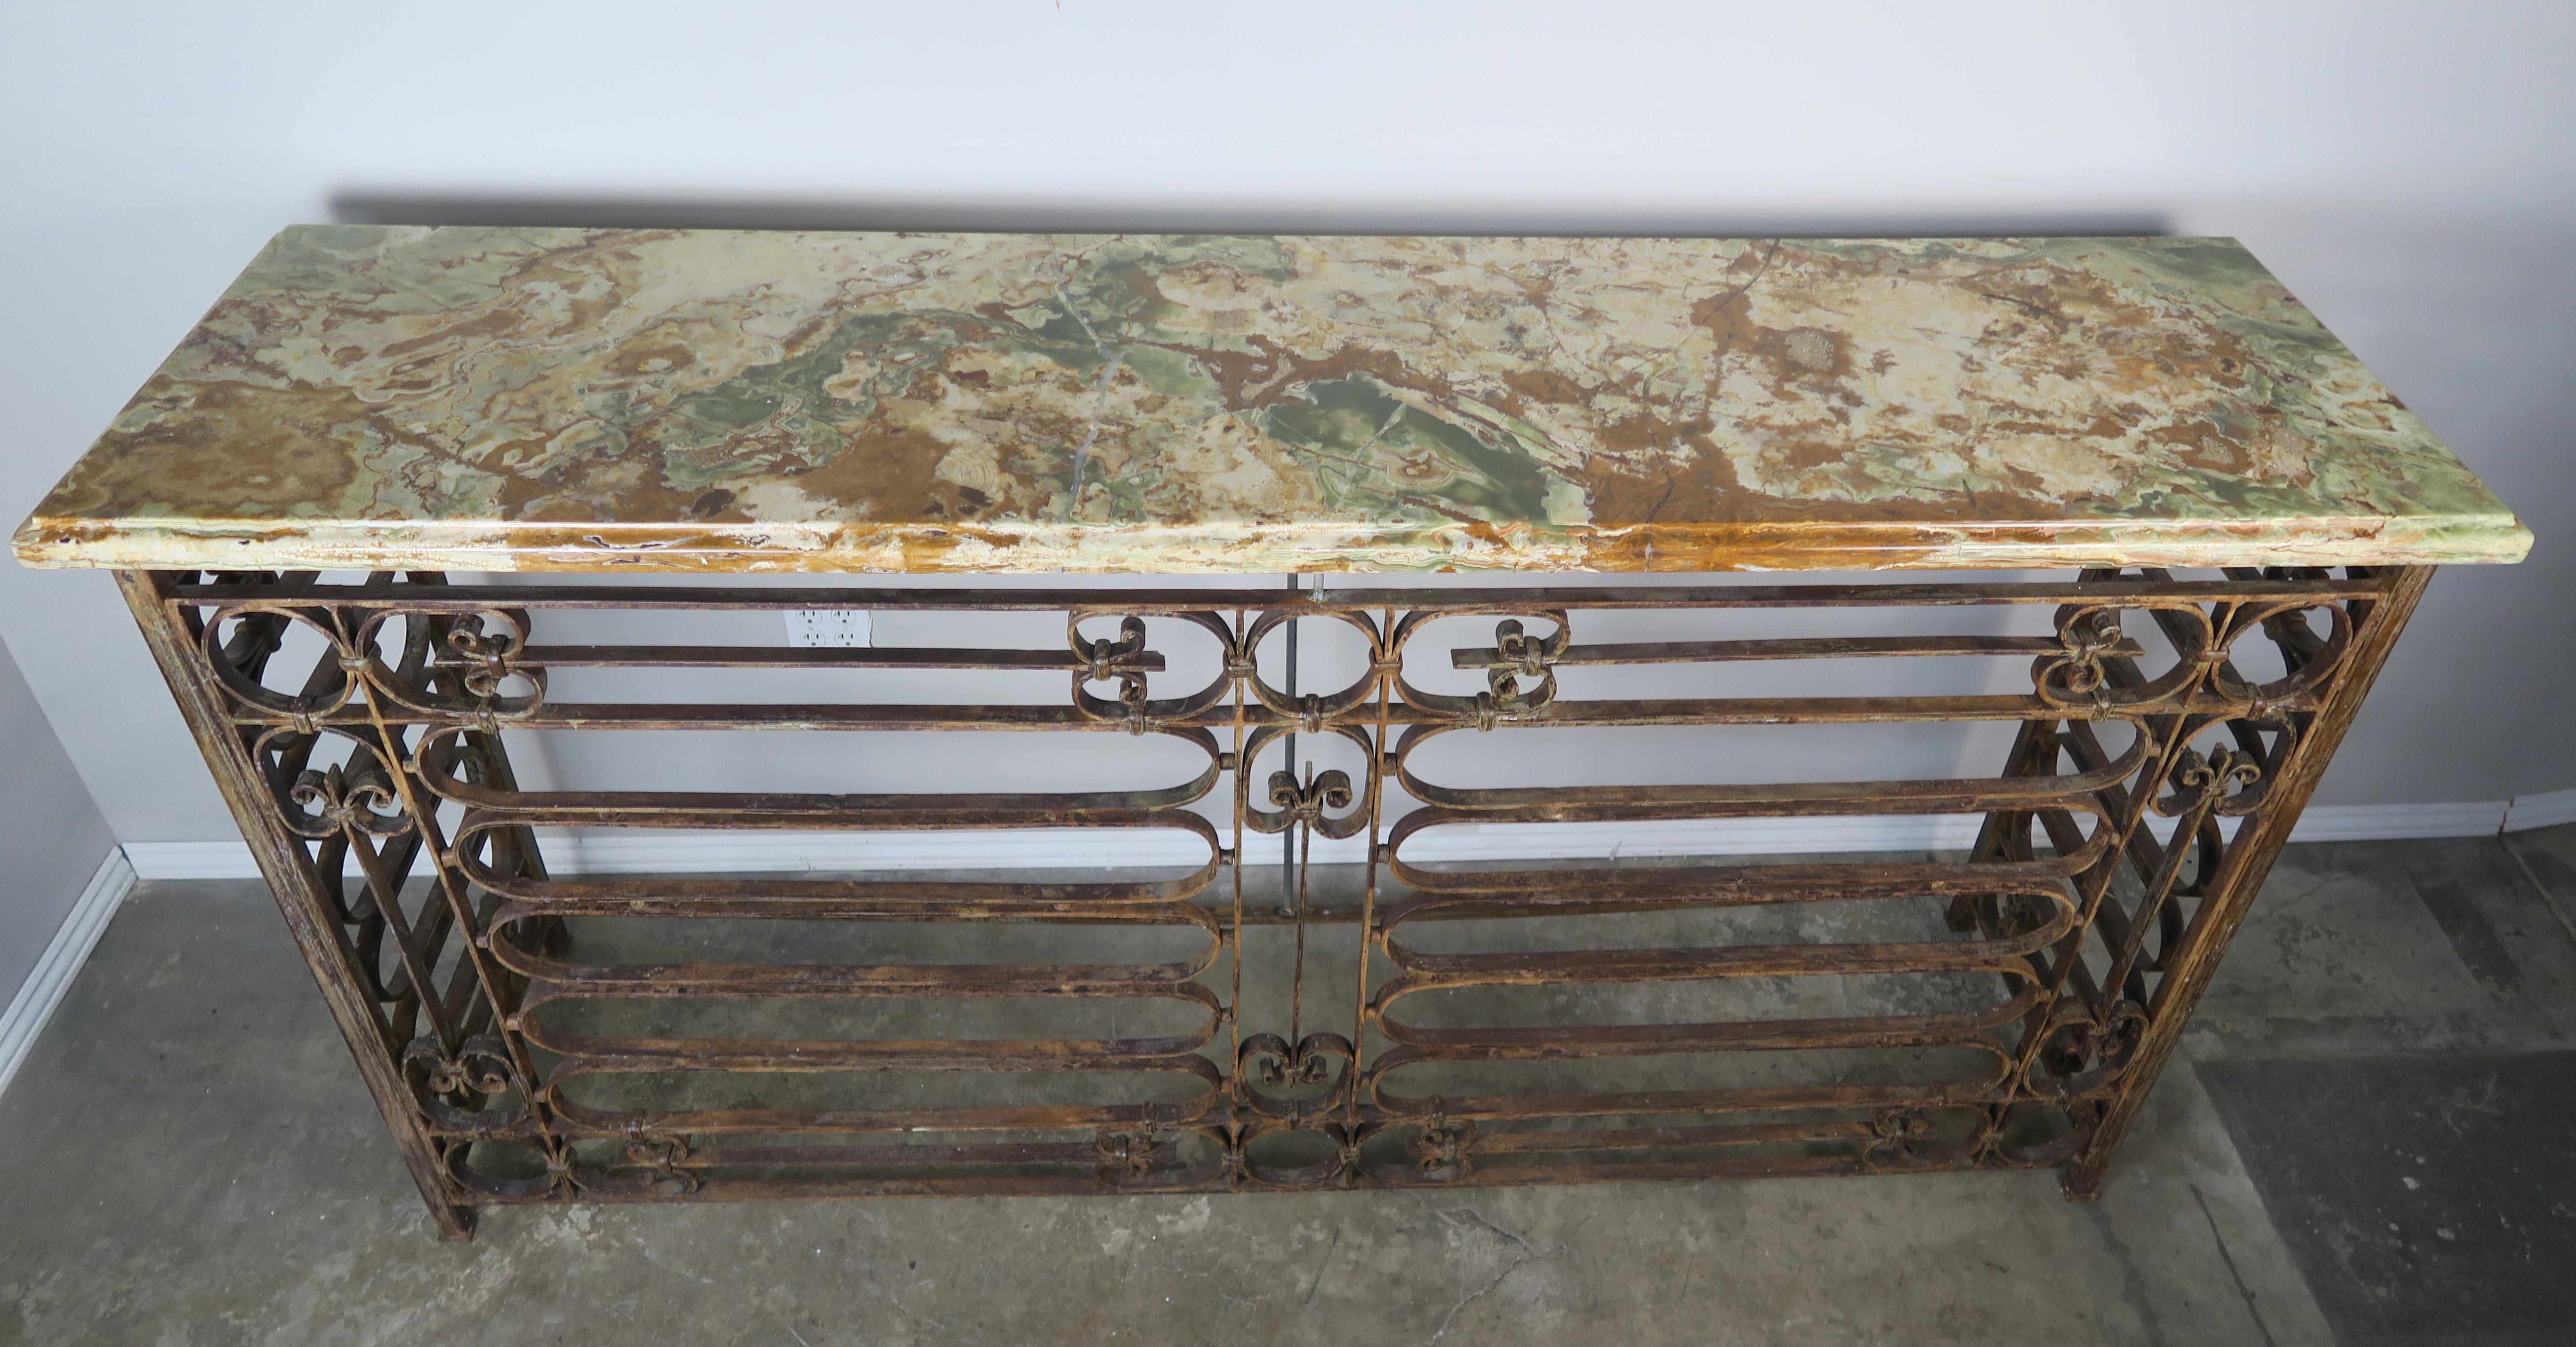 Monumental French Art Deco style wrought iron console with thick onyx top with single ogee and bullnose detail, circa 1930.
 